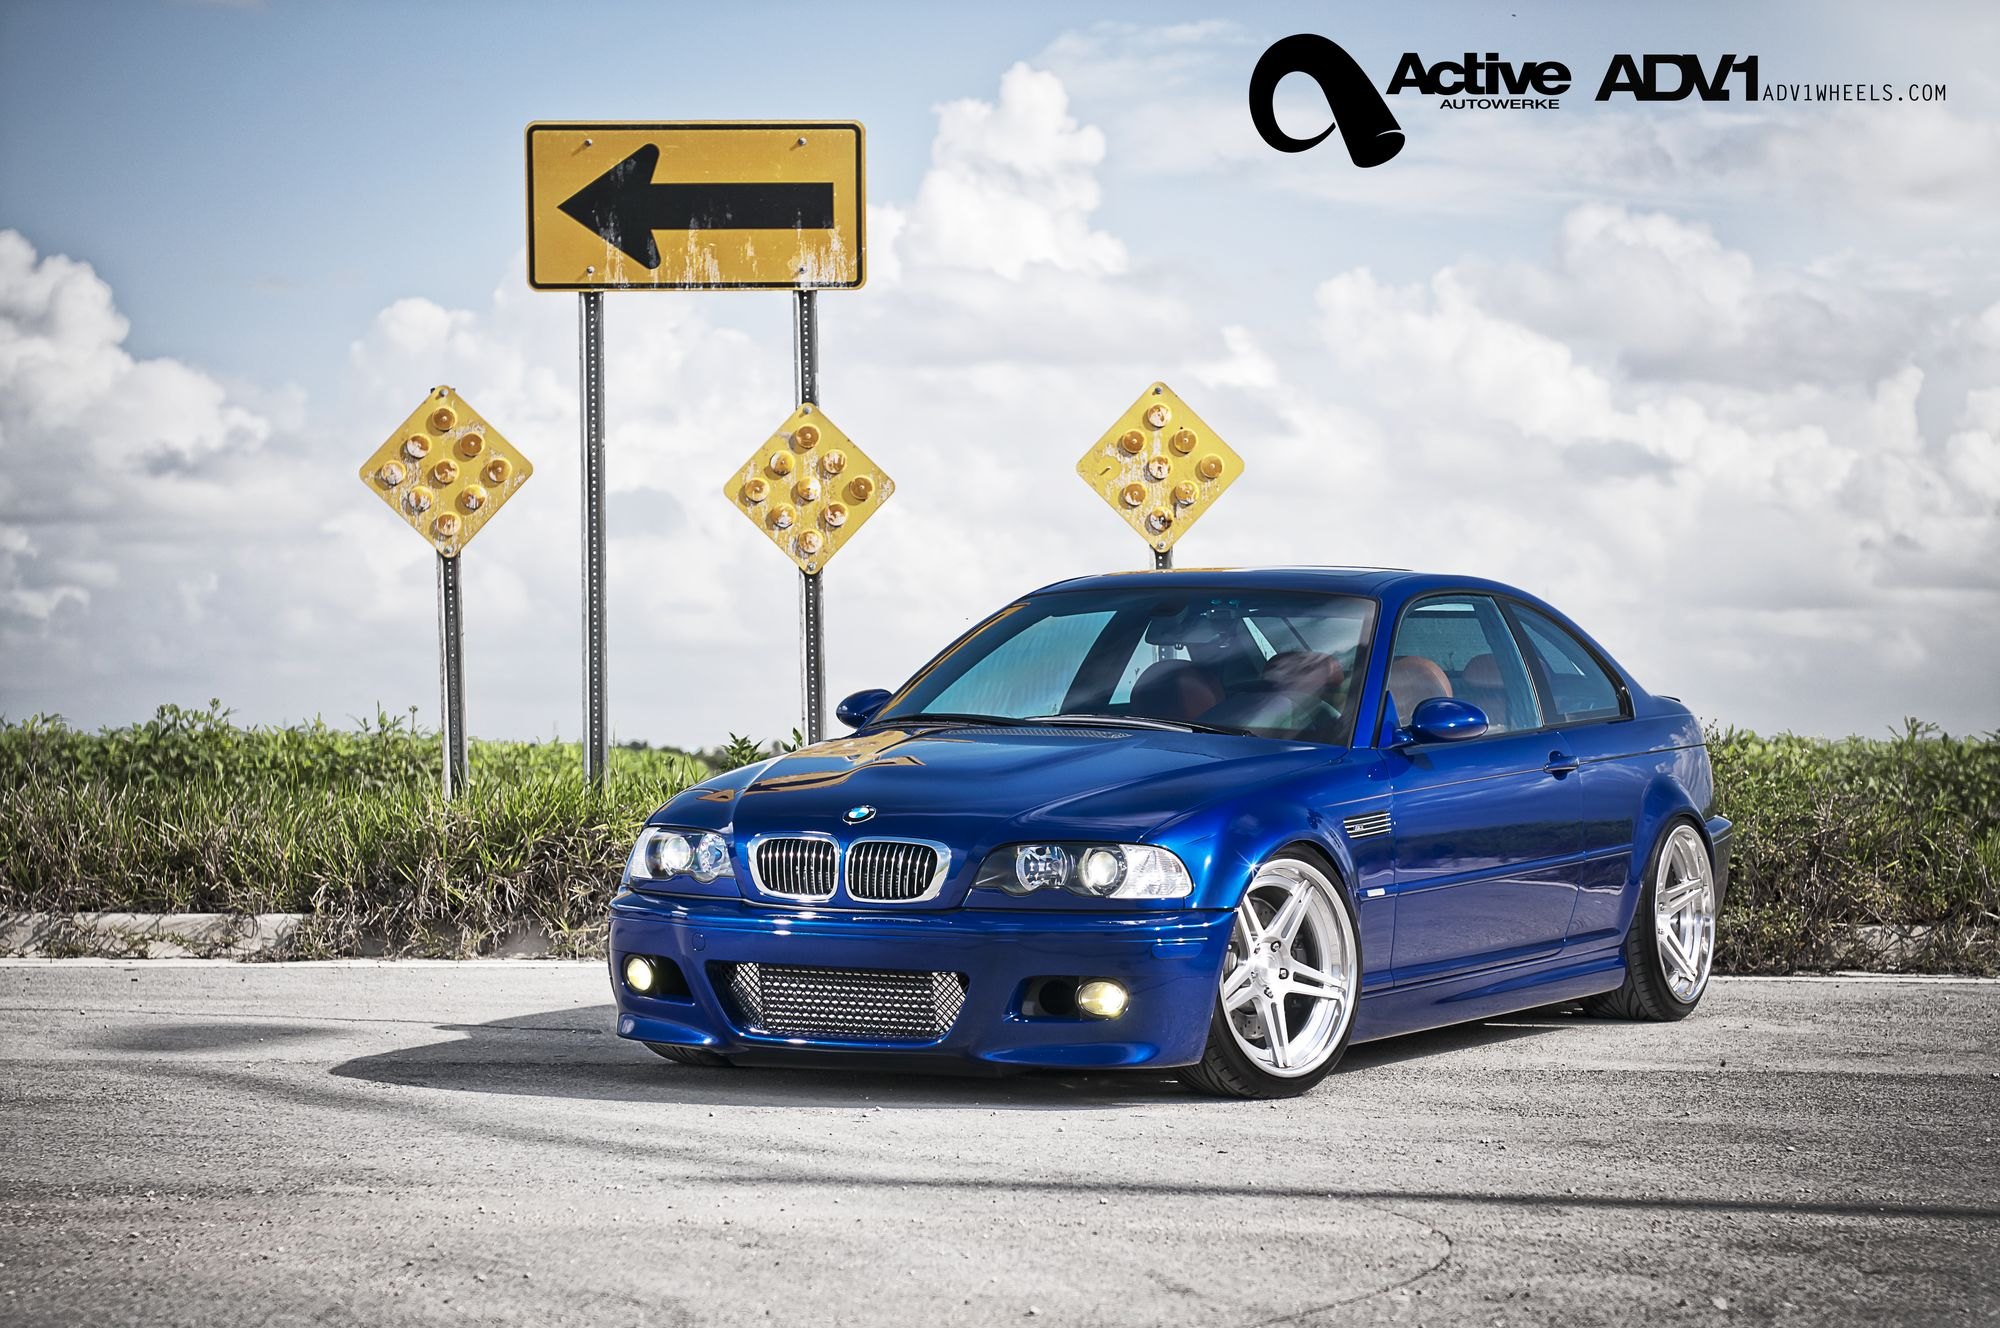 Blue BMW 3-Series with Crystal Clear Halo Headlights - Photo by ADV.1